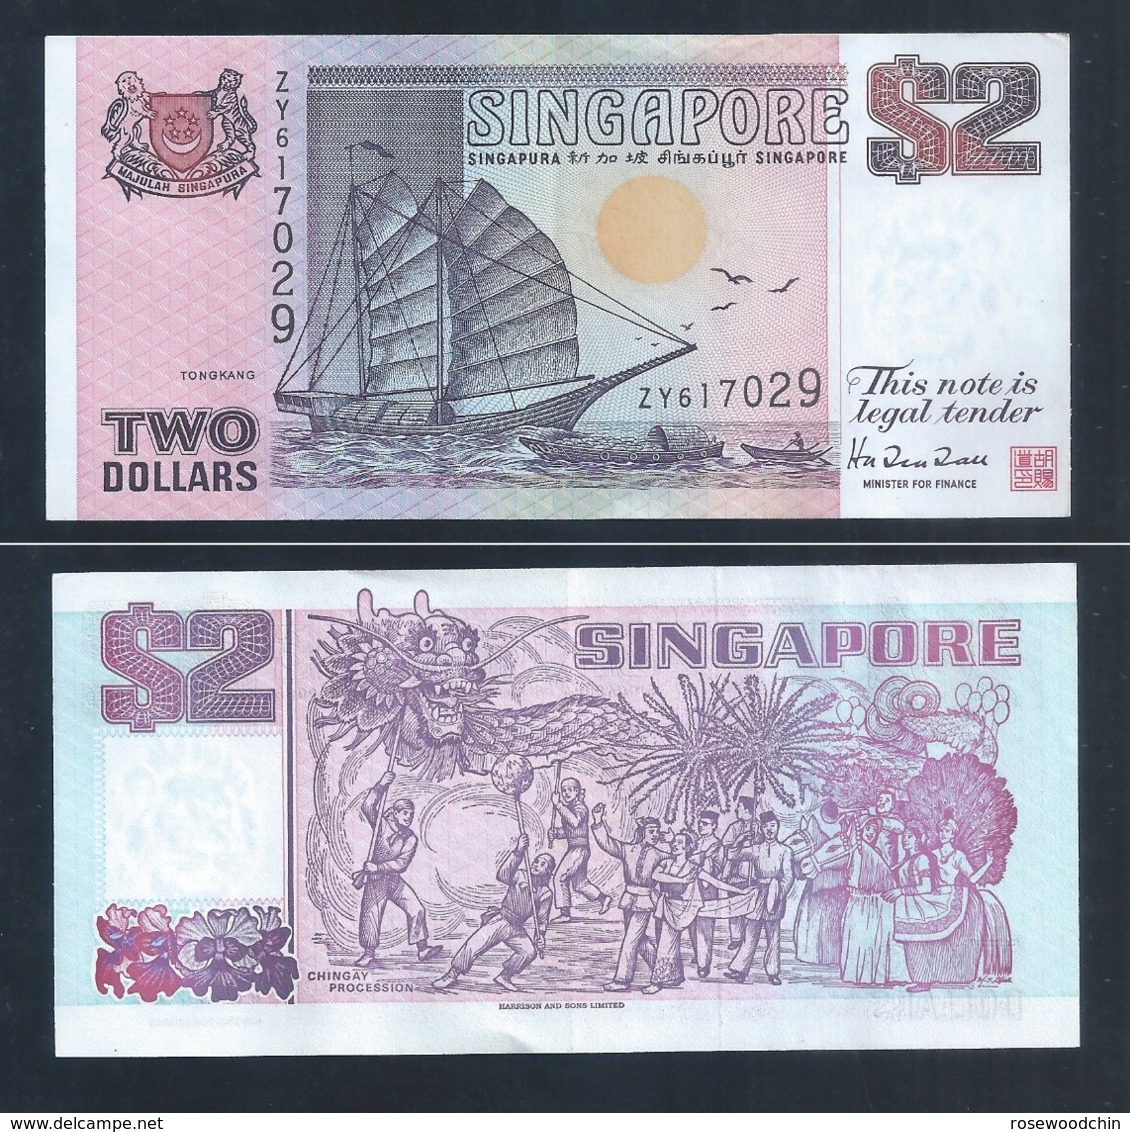 1 Pc. Of Singapore $2 Tong Kang / Ship Series Currency Paper Money Banknote (#137B) AU - Singapour